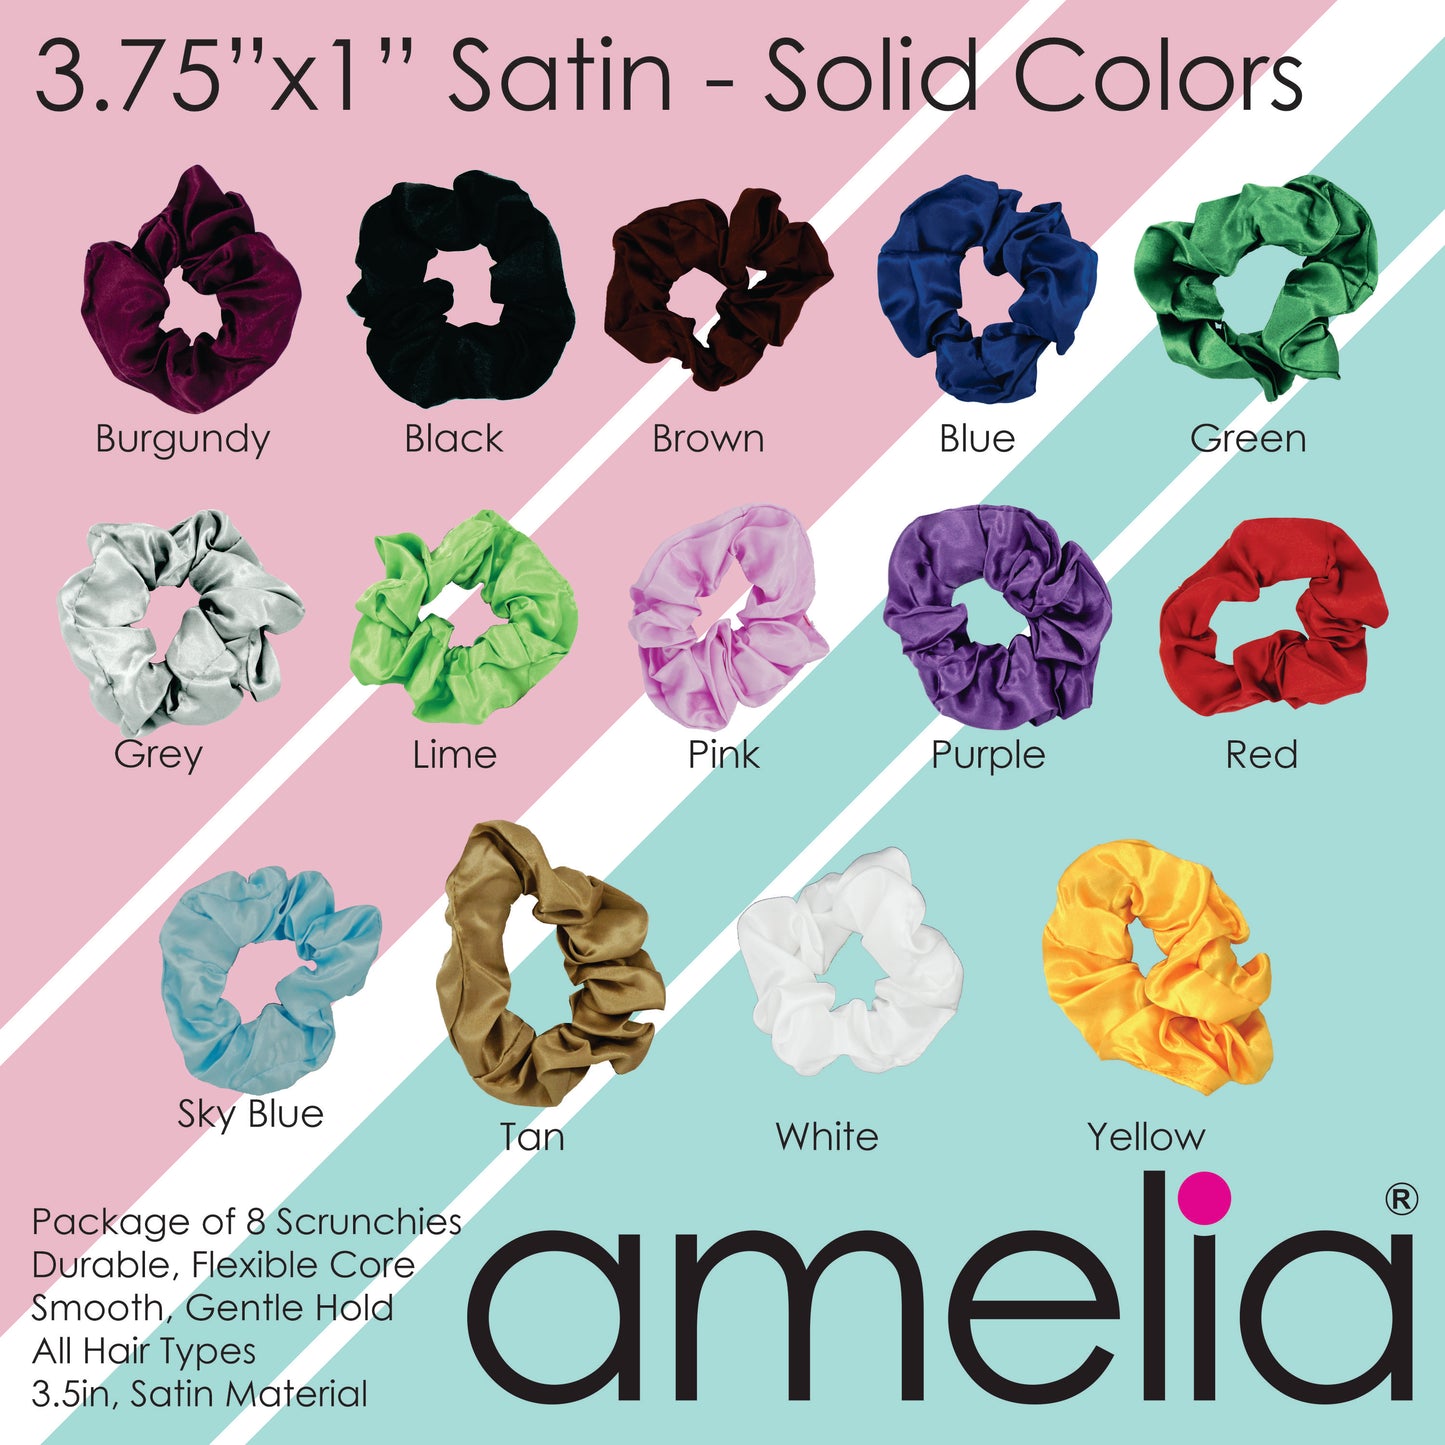 Amelia Beauty Products, Sky Satin Scrunchies, 3.5in Diameter, Gentle on Hair, Strong Hold, No Snag, No Dents or Creases. 8 Pack